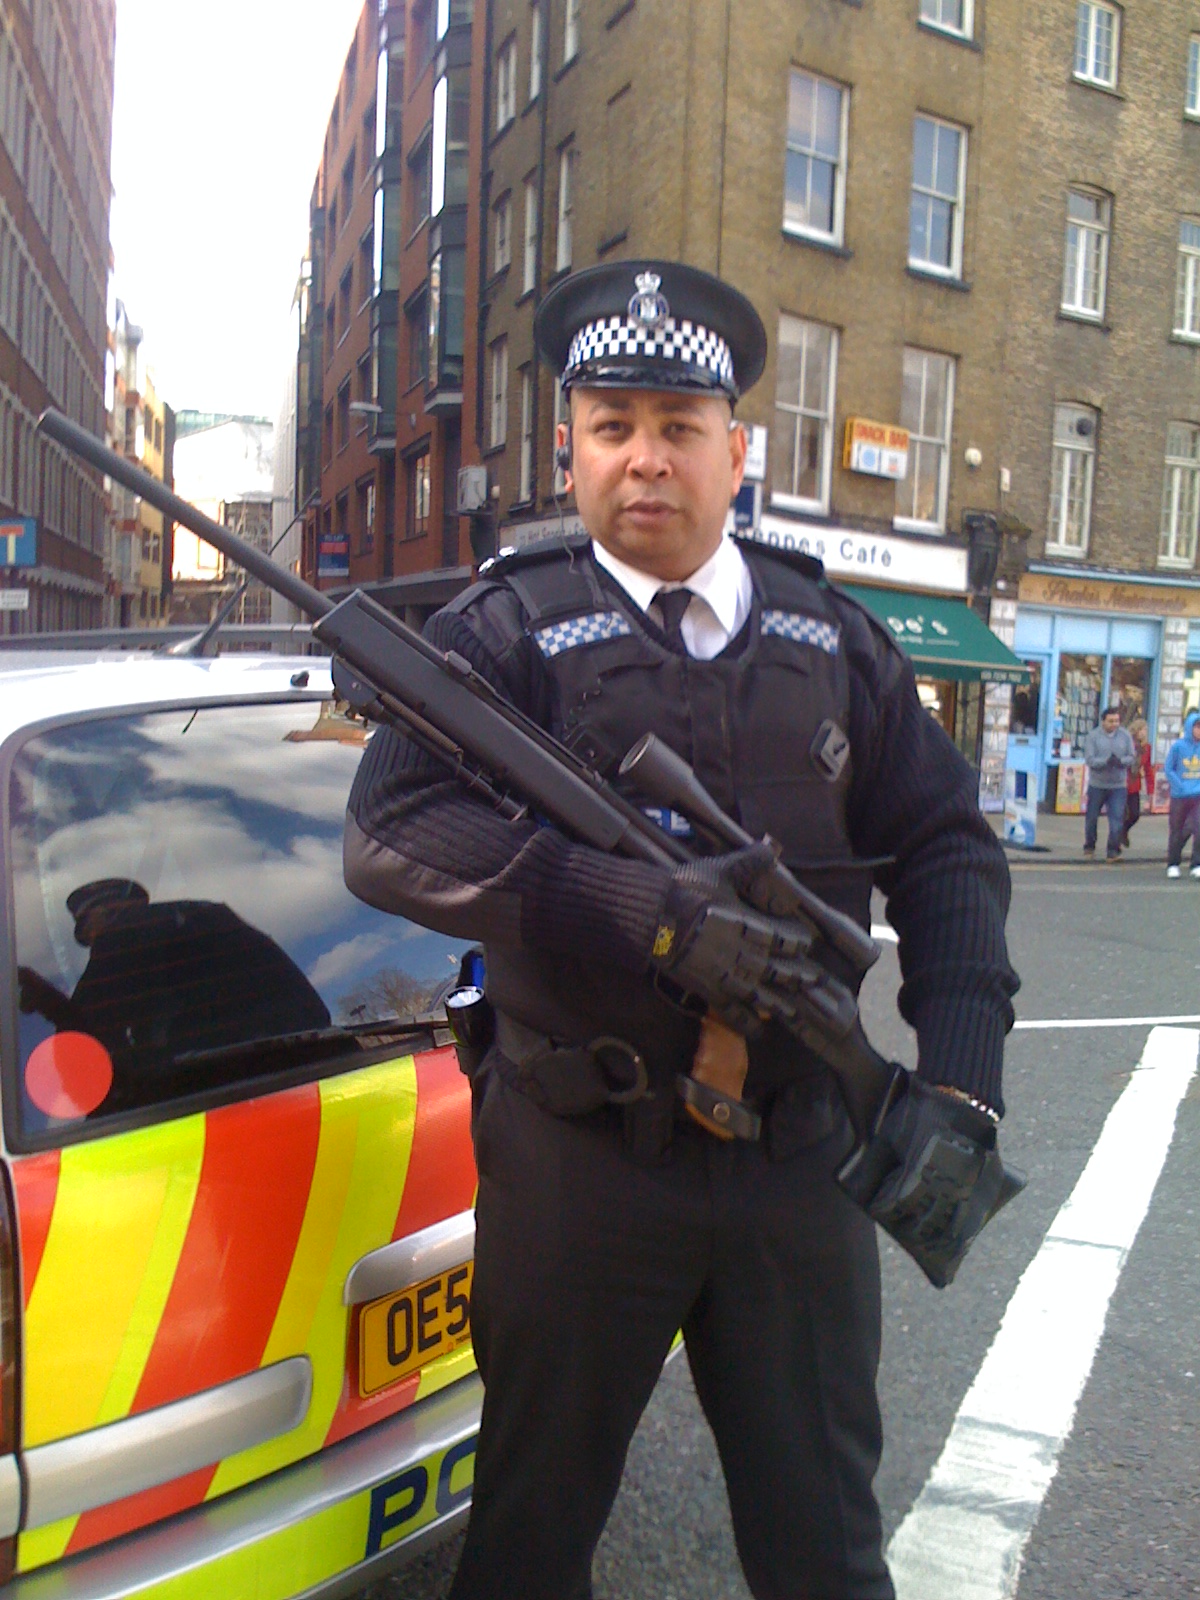 Actor Robby Haynes - Armed Response Officer - Weapons Trained